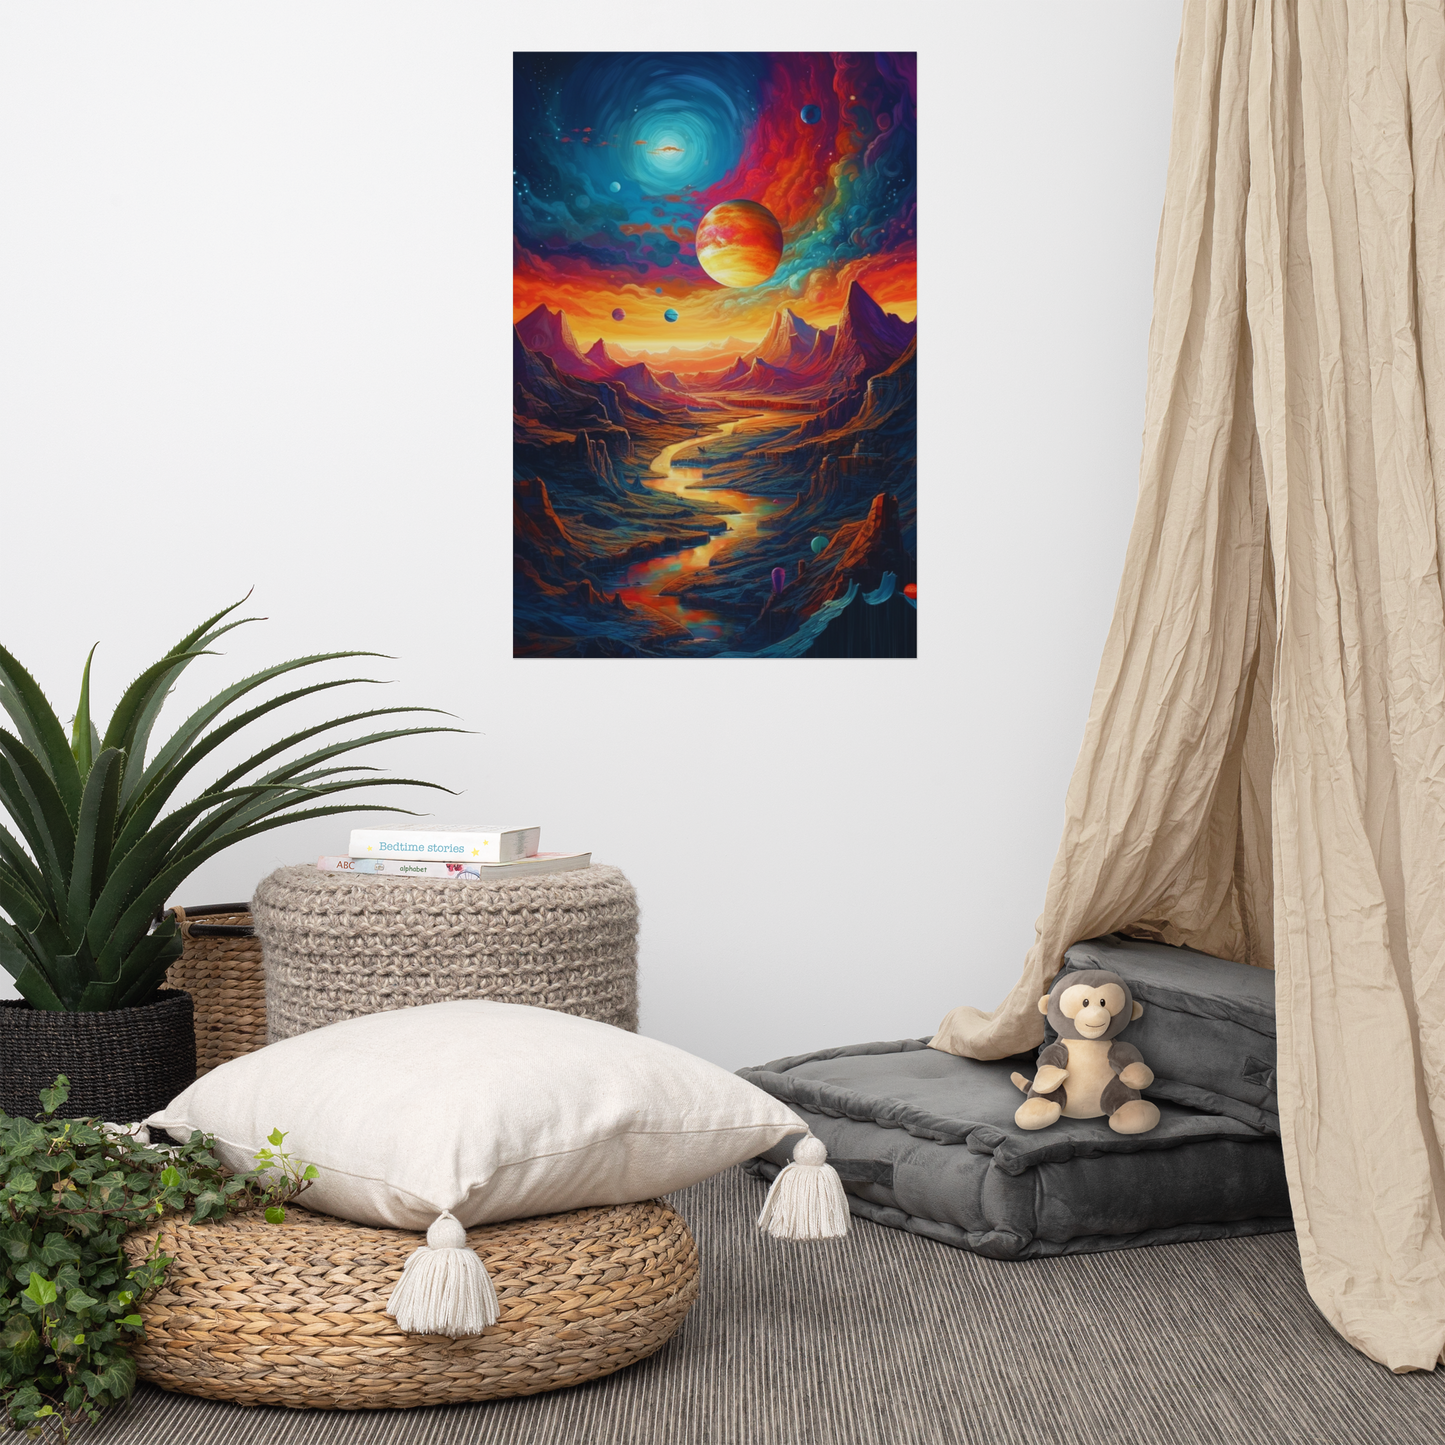 Stunning Extraterrestrial Landscape Art Poster: Vibrant Colors, Planets, and Mountains